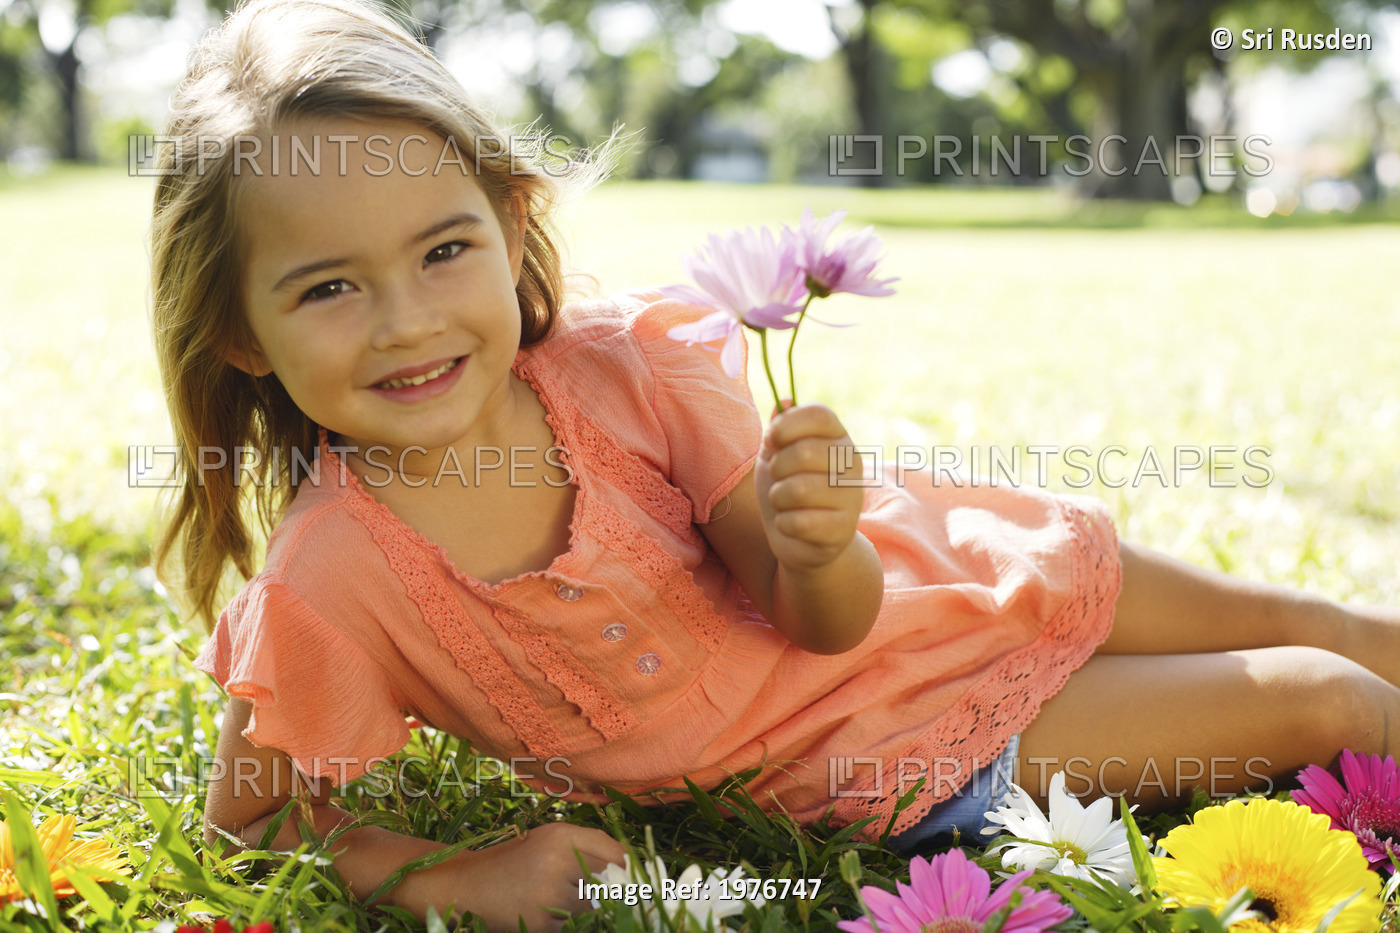 Young Girl Playing With Flowers In The Grass.